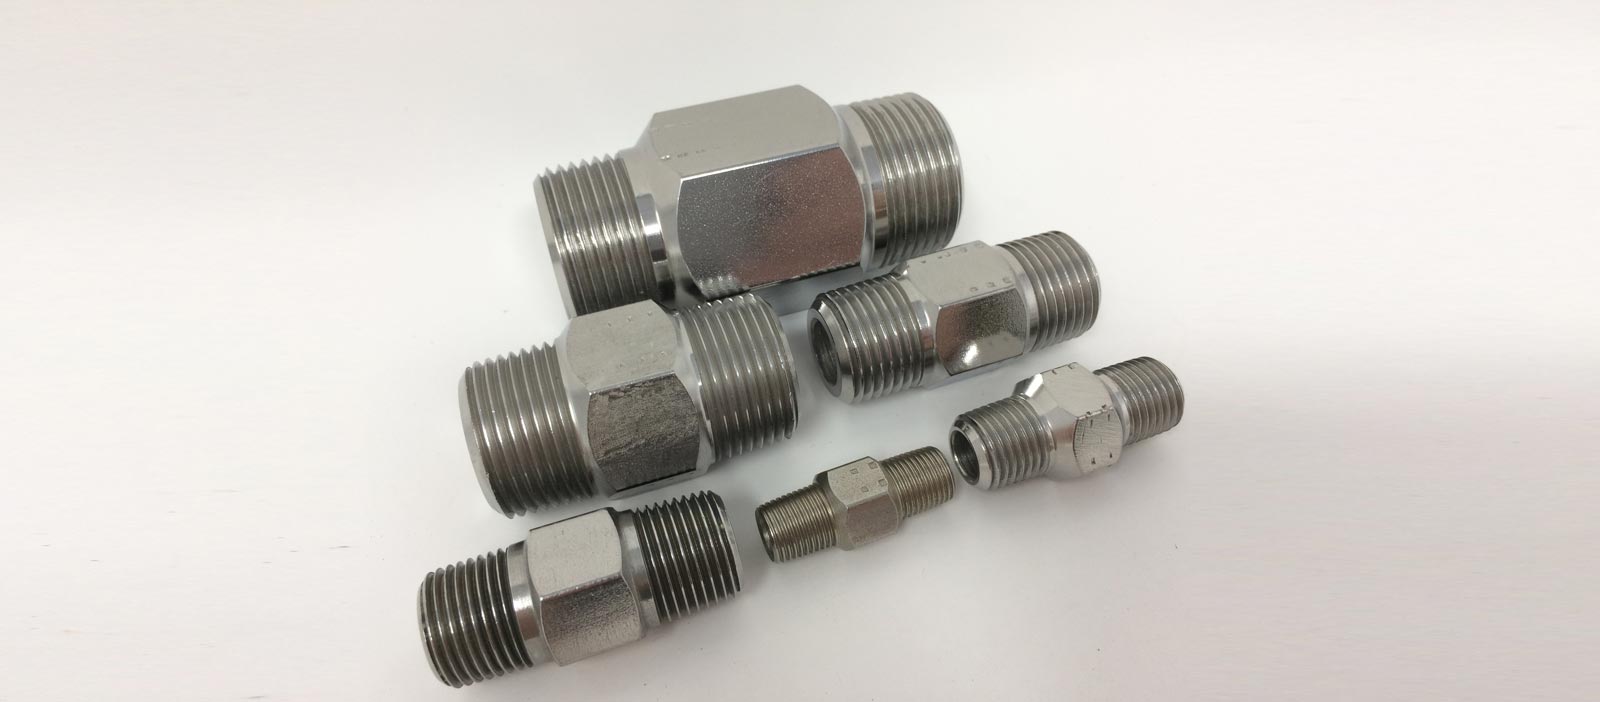 Stainless steel nipples join lances, pipe or hose.  Hex options for easy installations.